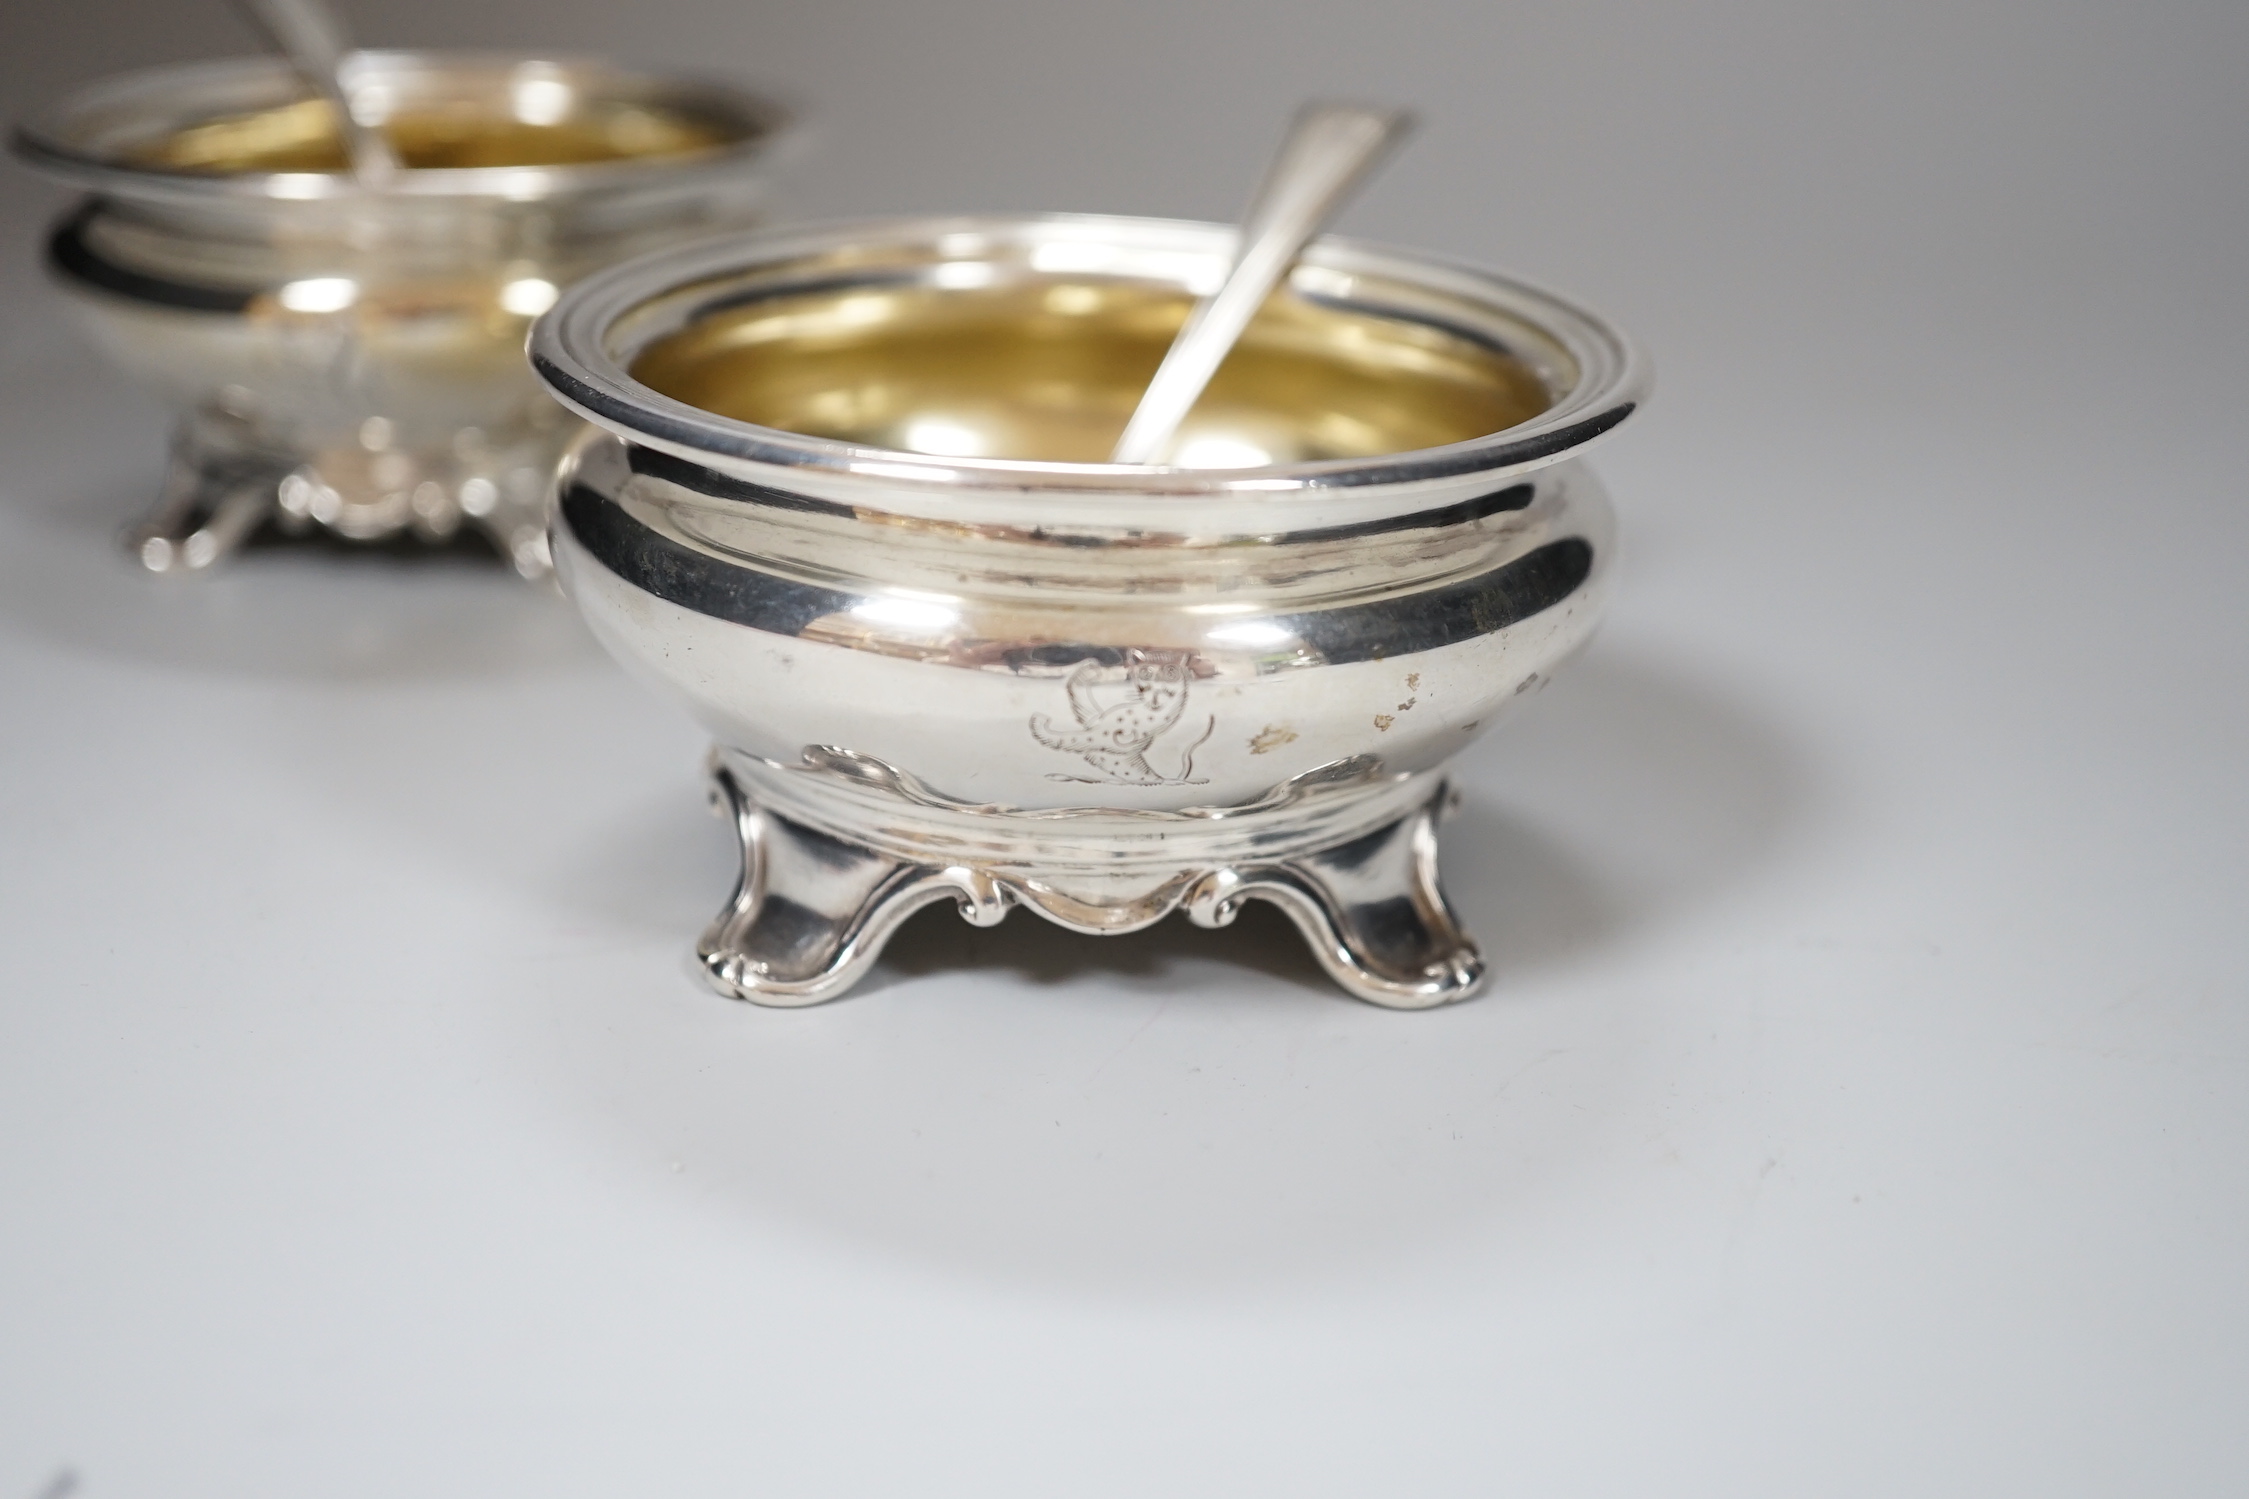 A pair of Victorian circular silver salts, with crests and scroll feet, makers Edward Barnard & Sons, London 1839, 207 grams, and a pair of George IV silver salt spoons, London 1827, 19 grams